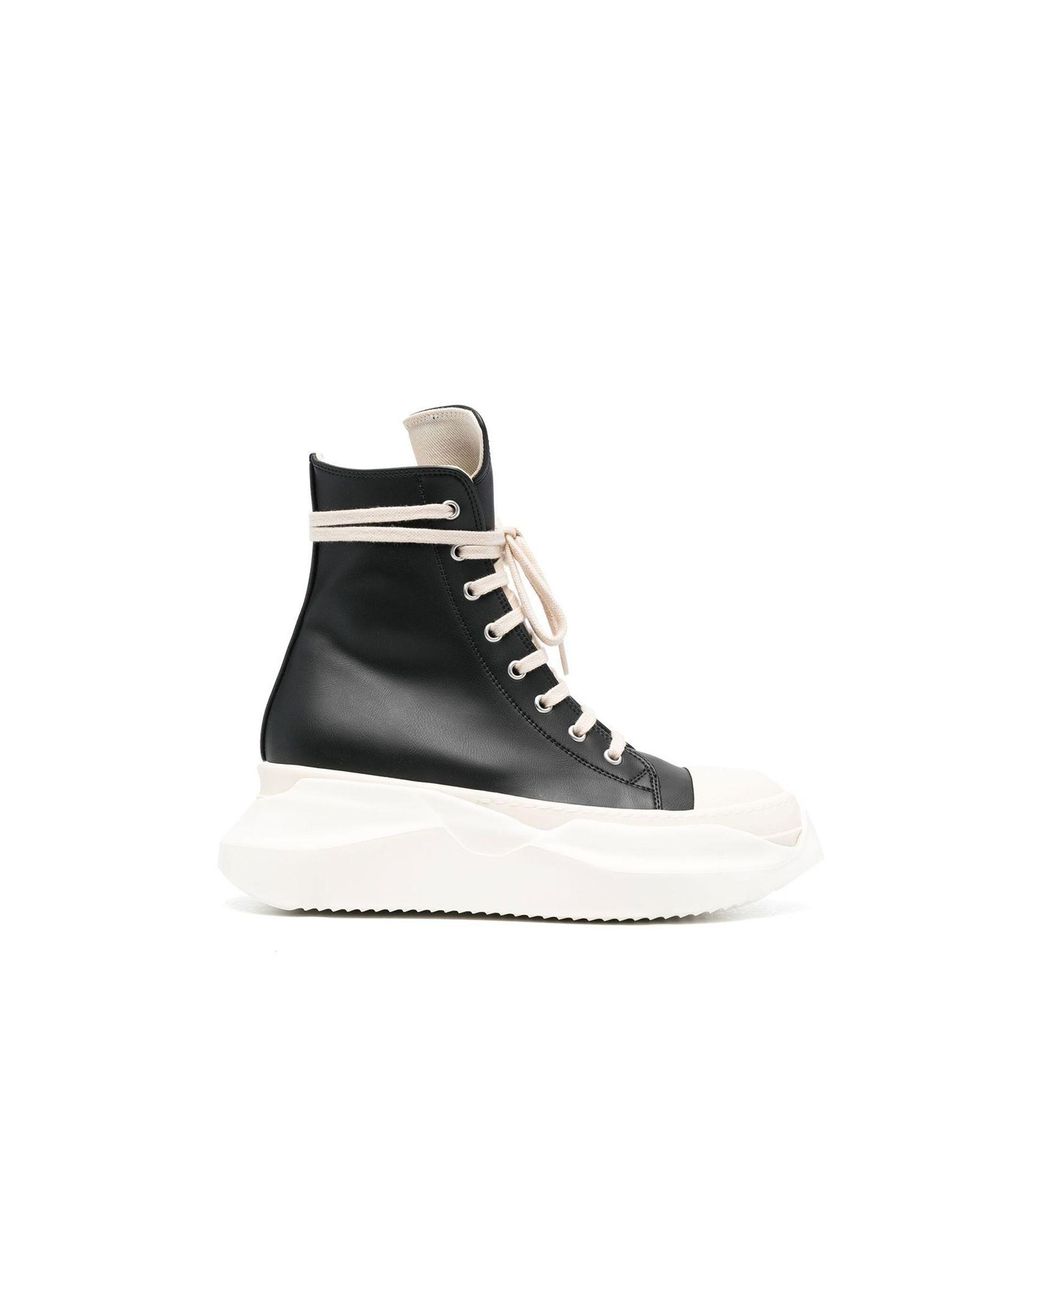 Rick Owens DRKSHDW Black Abstract High-top Leather Sneakers | Lyst